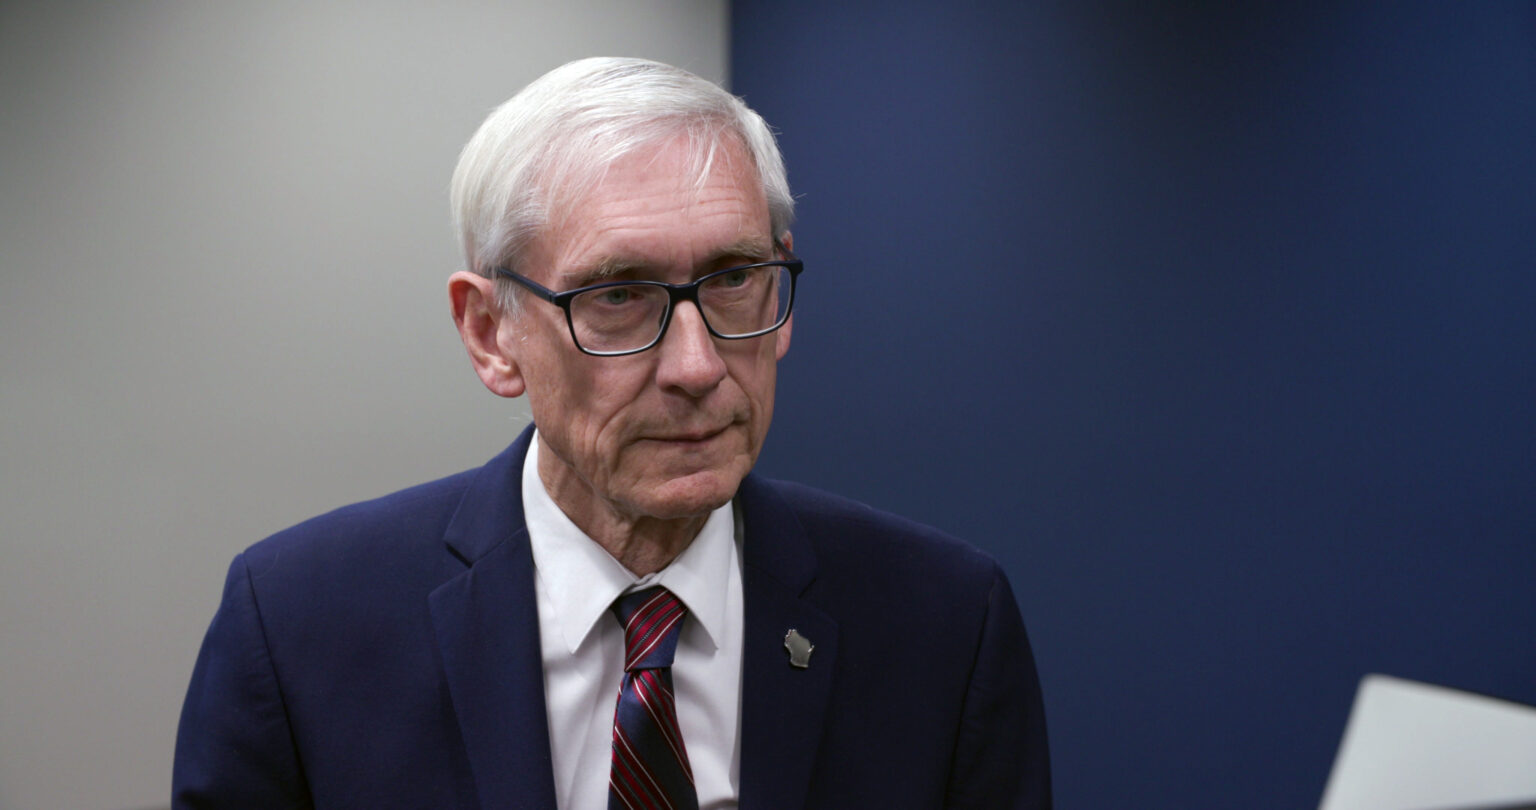 Tony Evers stands in a room and responds to questions from a reporter.